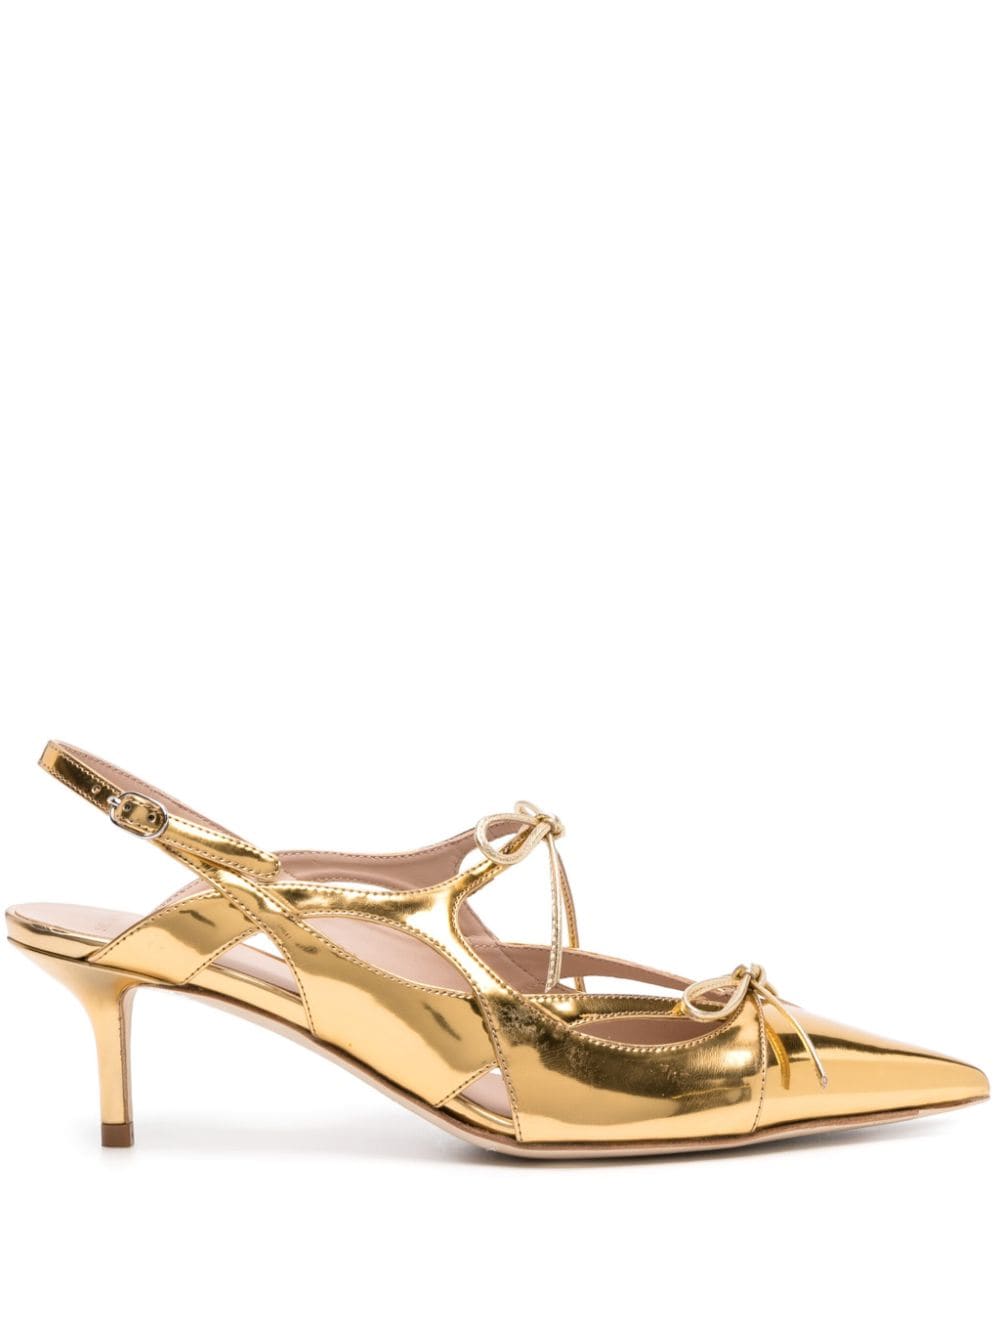 Scarosso Bling 60mm patent-leather pumps - Gold von Scarosso